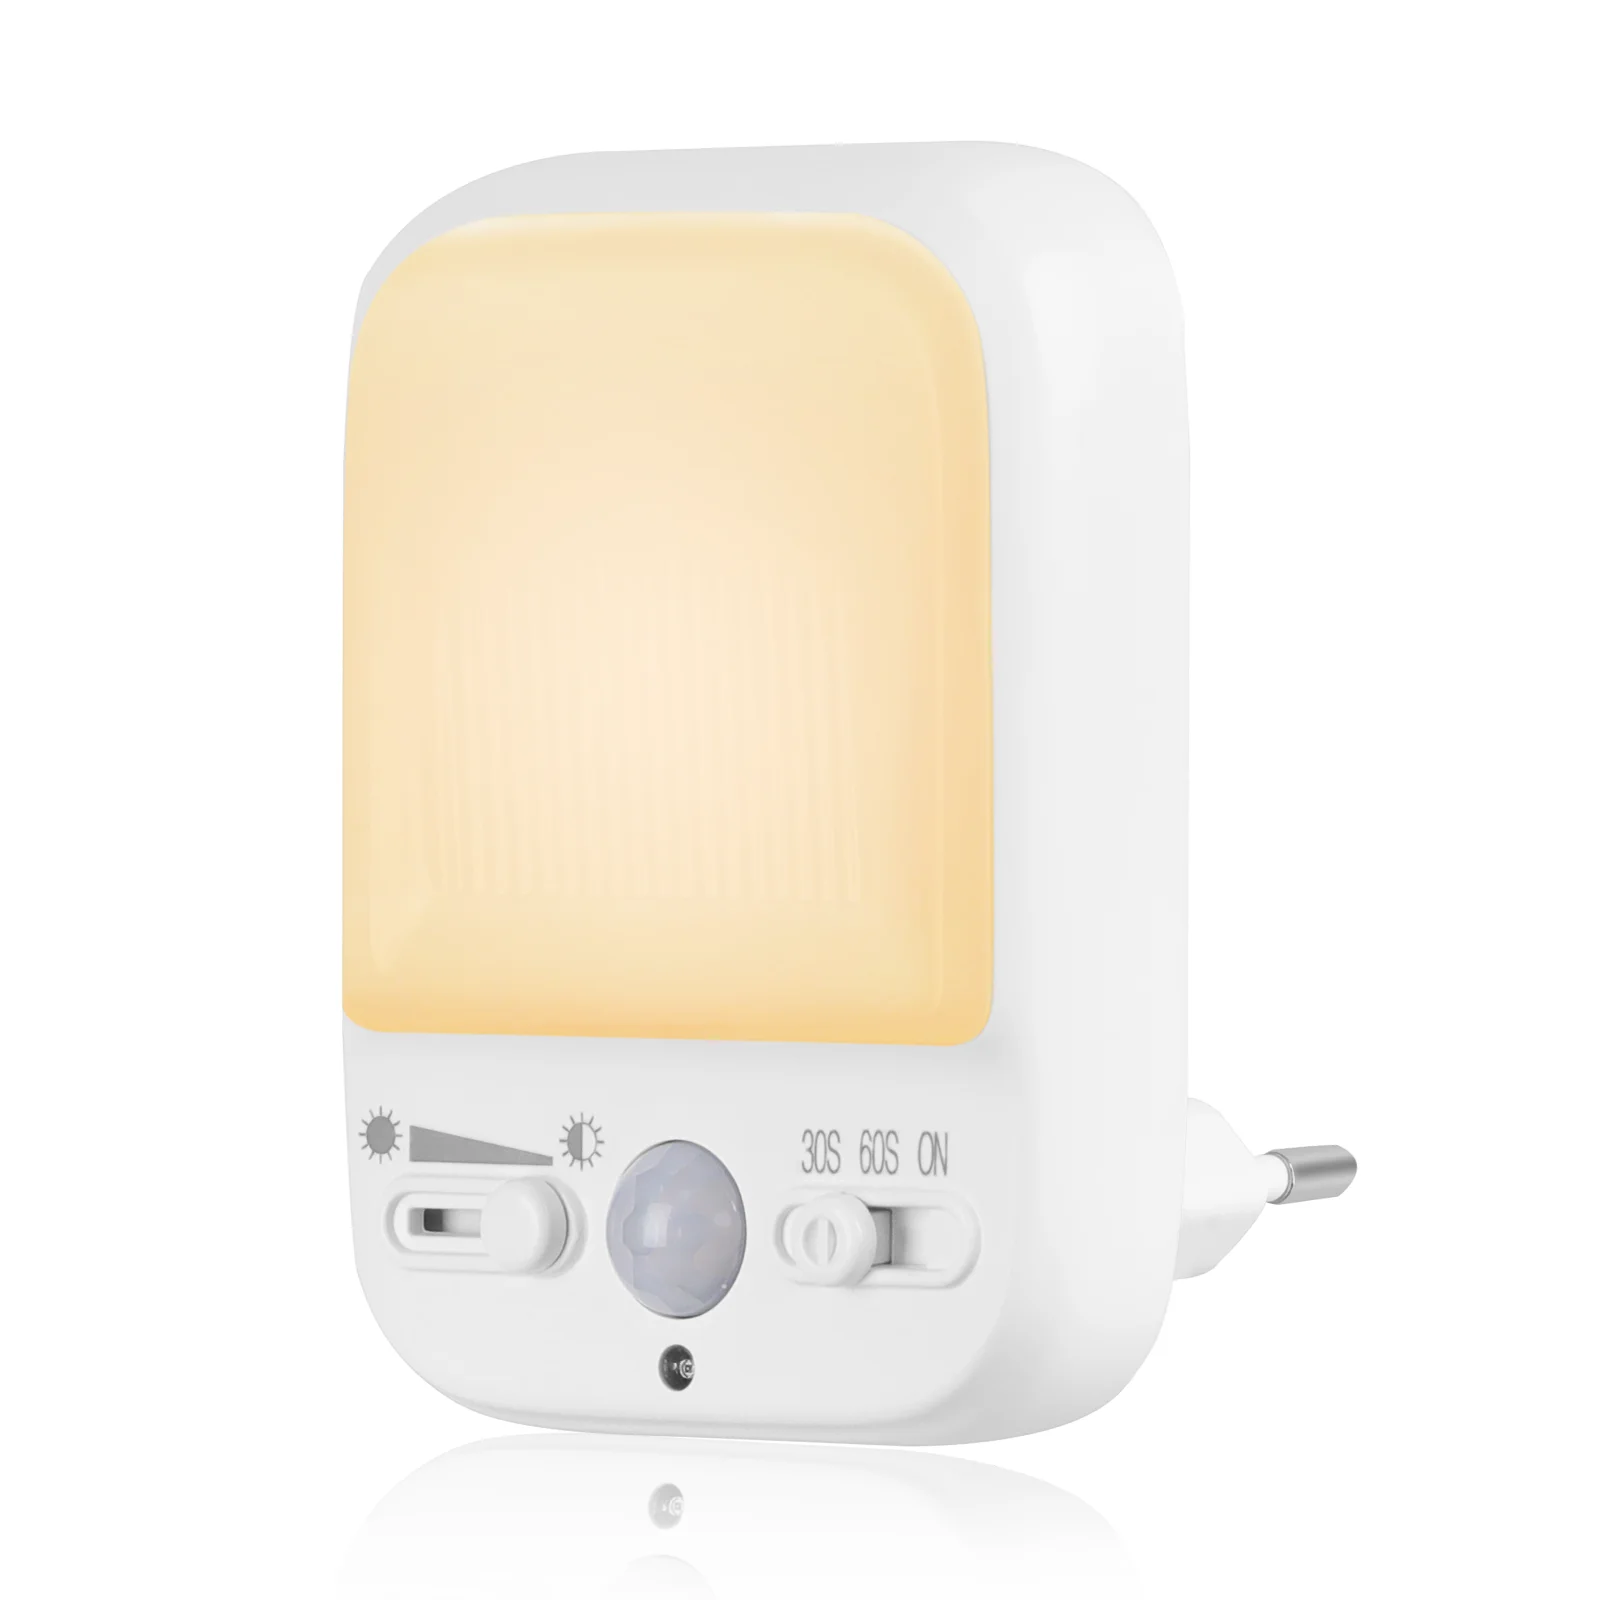 https://ae01.alicdn.com/kf/Sf91c6fd4b4af42deb6557bc6605bca28V/Night-Light-Socket-Dimmable-Night-Light-with-Motion-Sensor-Indoor-30s-60s-Automatic-On-Off-LED.png